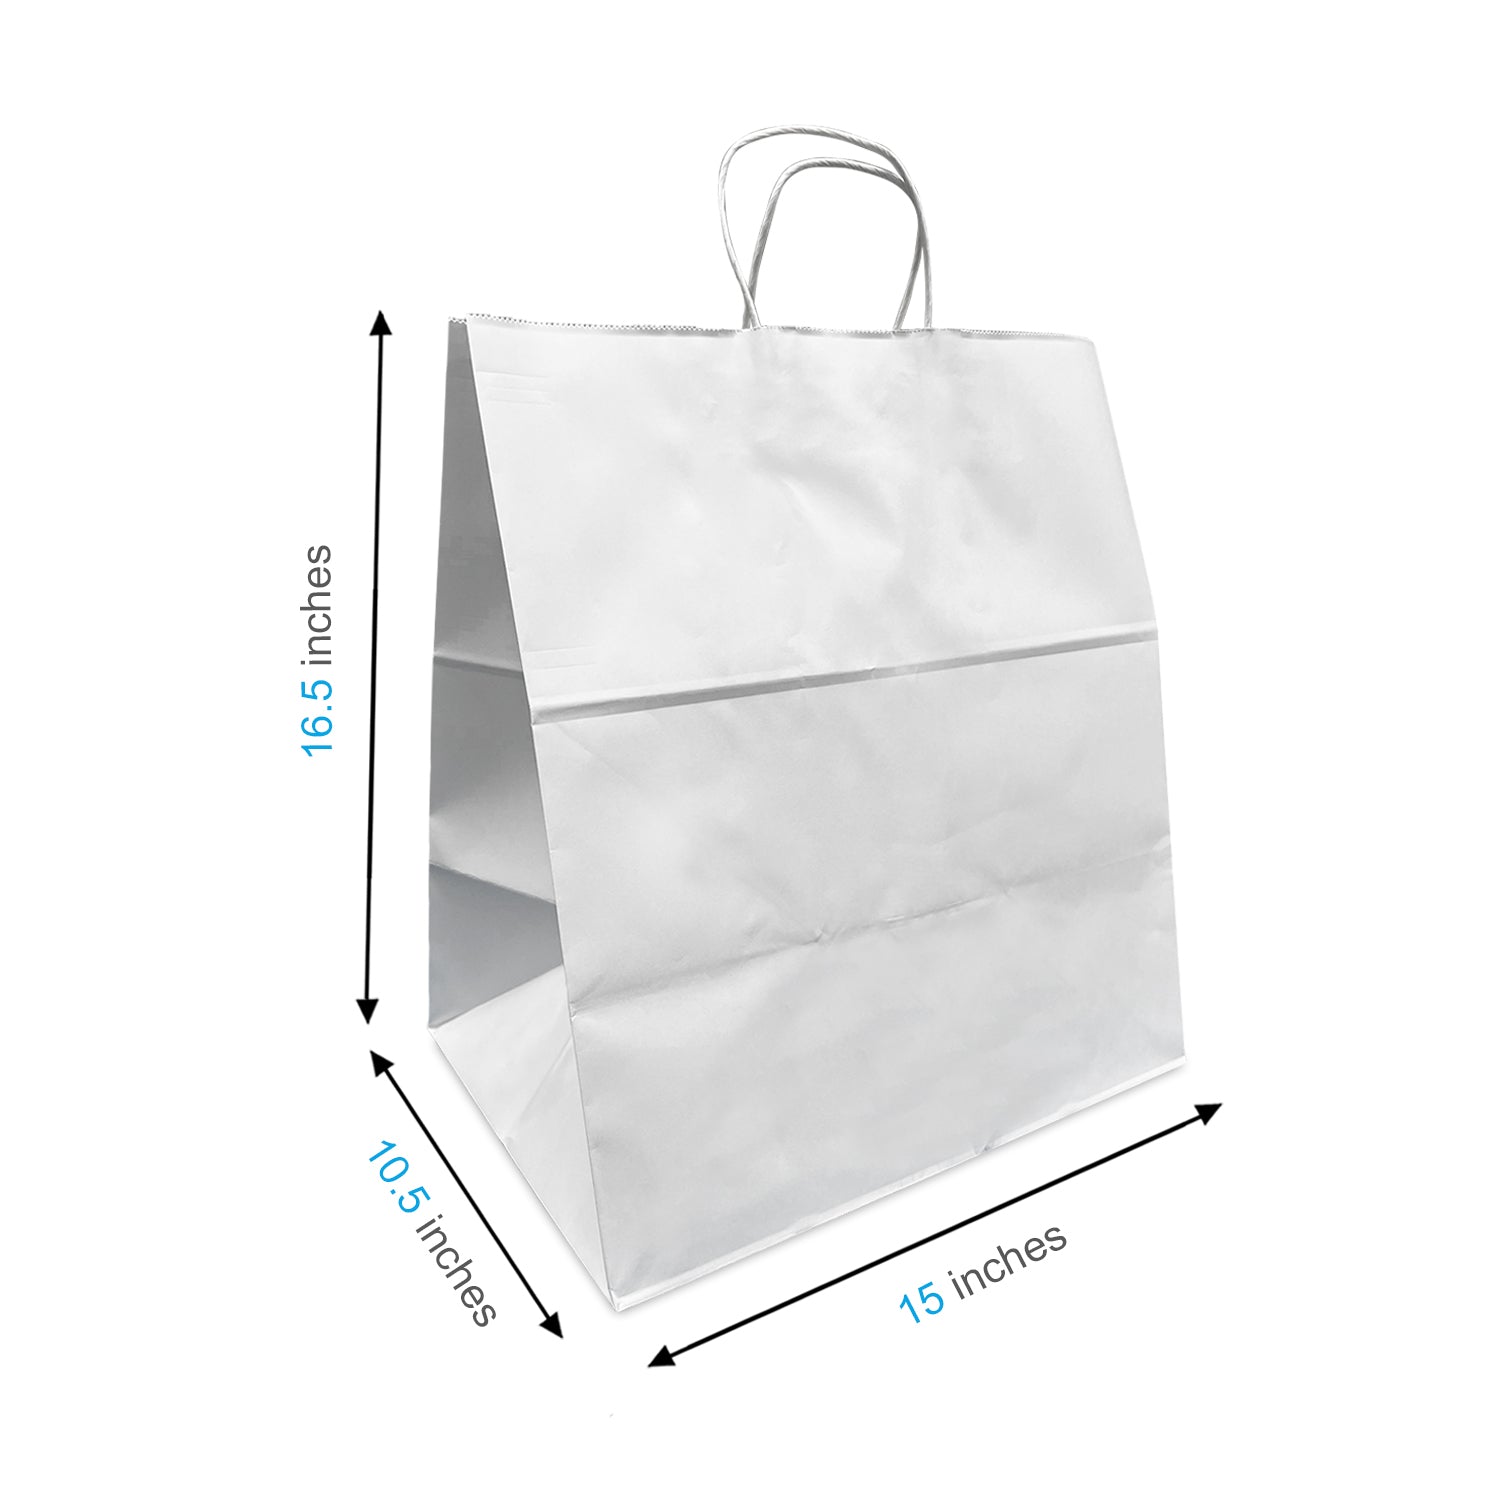 200 Pcs, Dumbo,  15x10.5x16.5 inches, White Paper Bags, with Twisted Handle